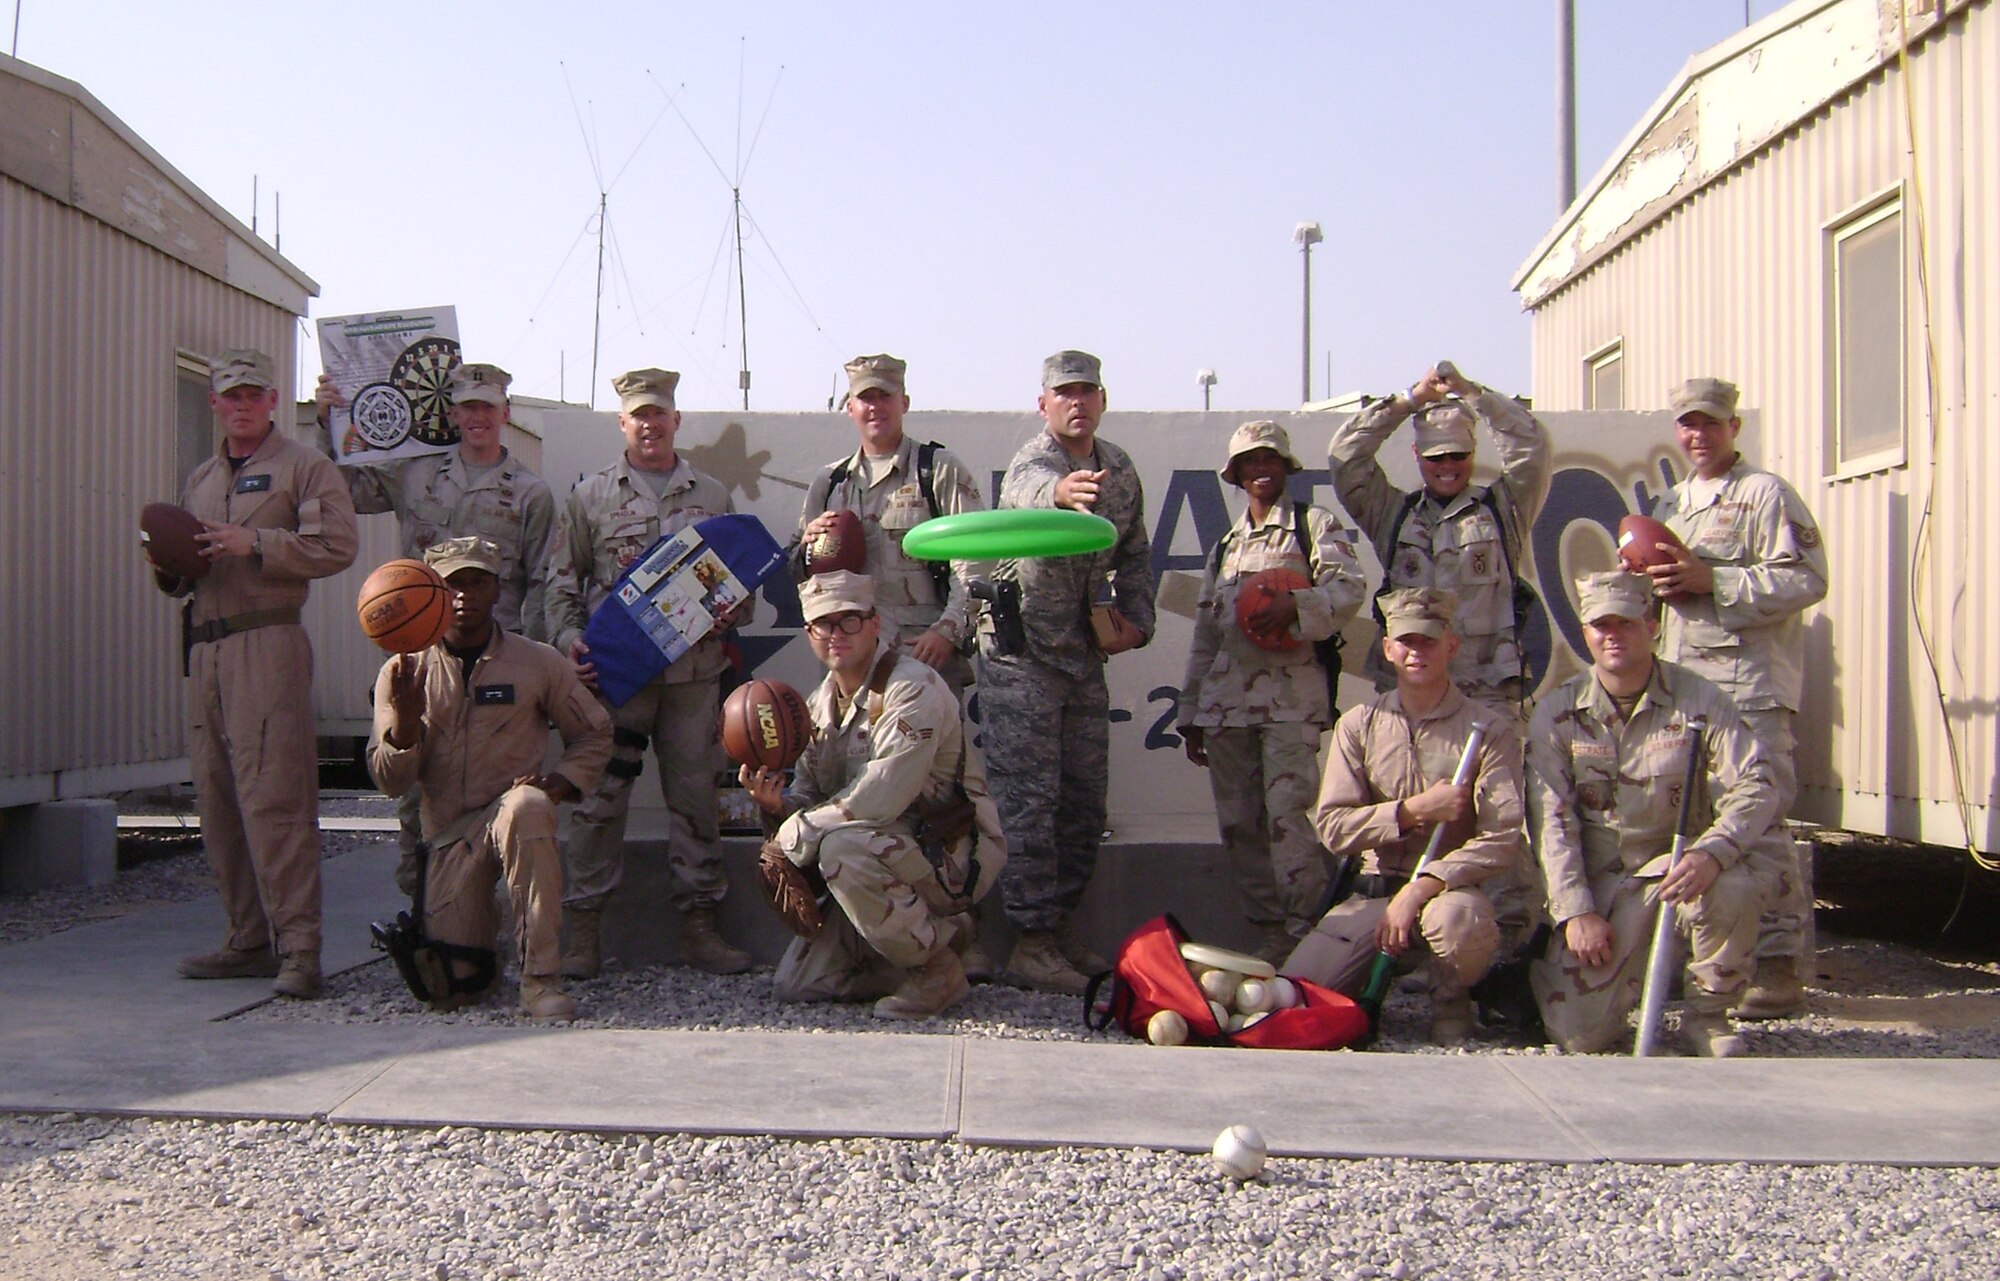 Airmen from the 586th, 886th, and 887th Security Forces Squadrons, including Senior Master Sgt. Timothy Spradlin, 445th Civil Engineer Squadron, Wright-Patterson AFB, Ohio, (standing 3rd from left) display the sports equipment which members of the wing collected and sent to them for their enjoyment while deployed down range. (Courtesy photo)